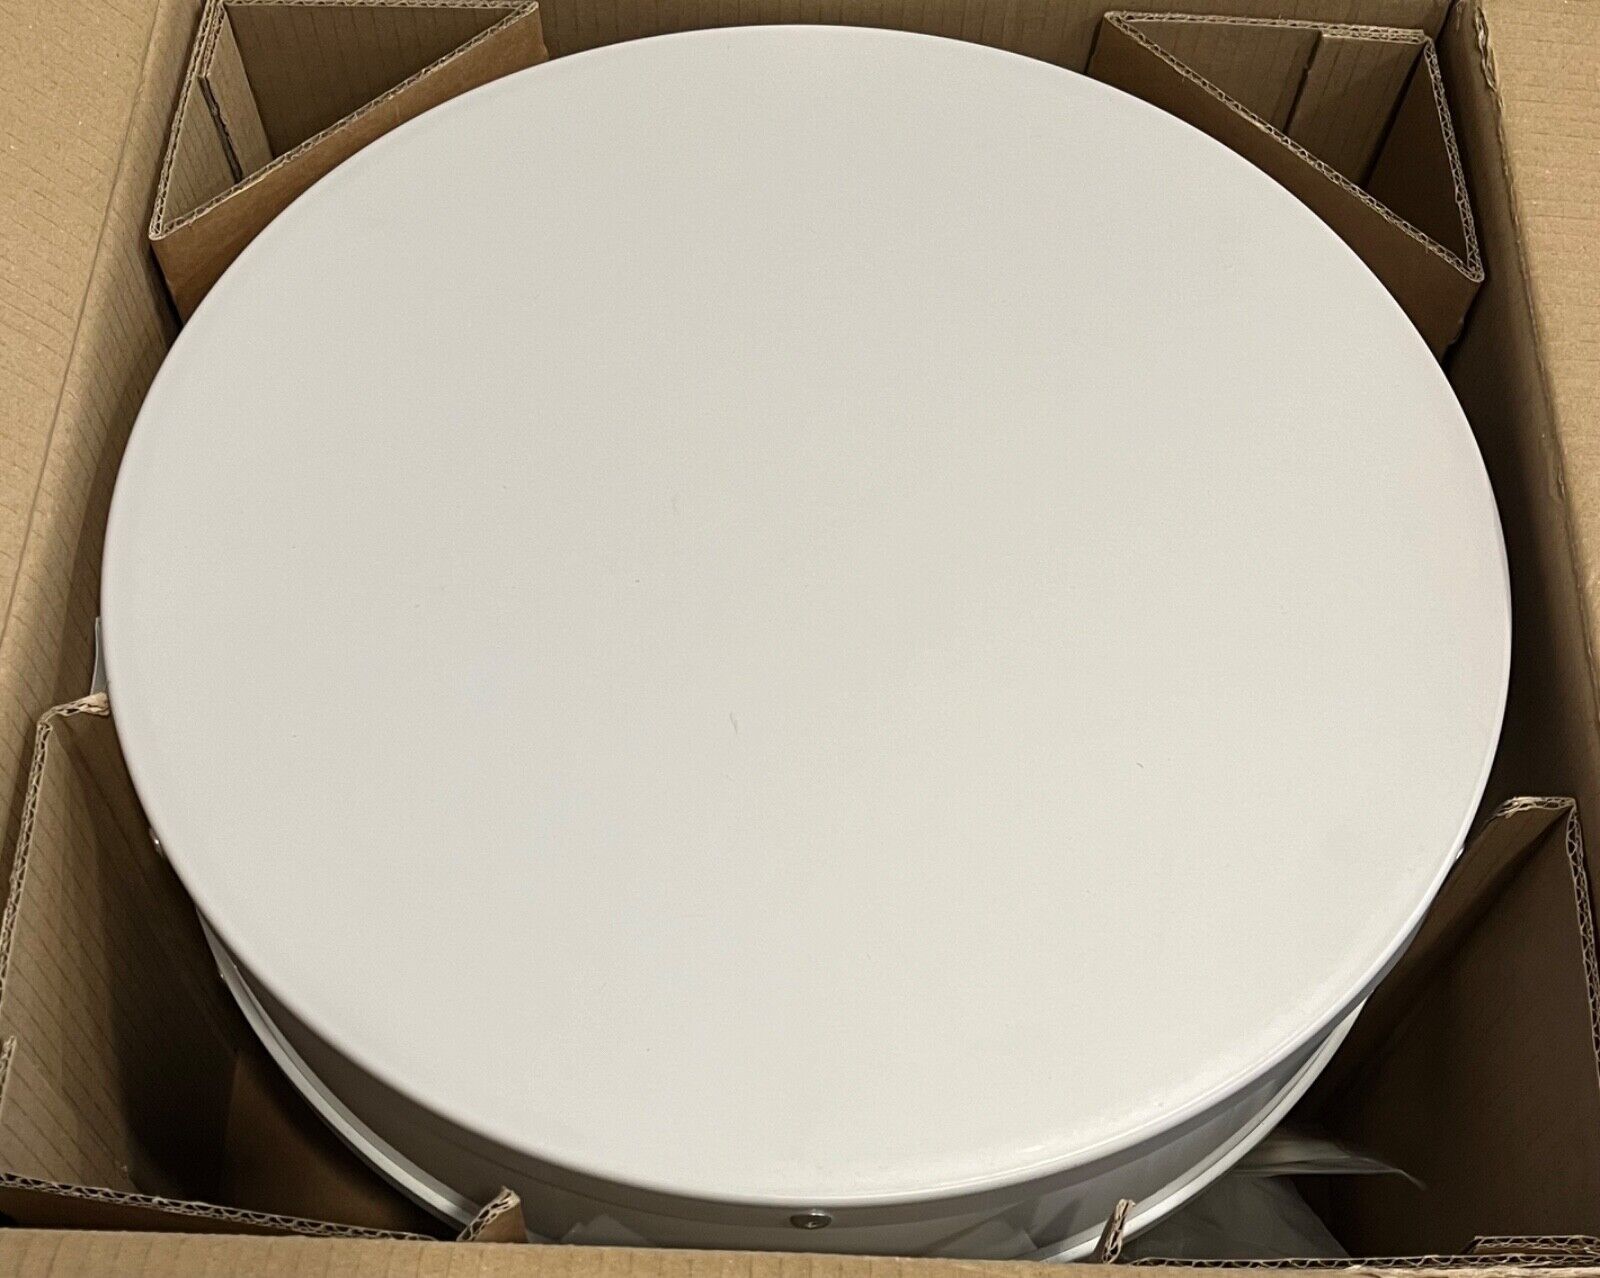 COMMSCOPE VHLP - VALULINE... HIGH PERFORMANCE LOW PROFILE MICROWAVE ANTENNA, SIN